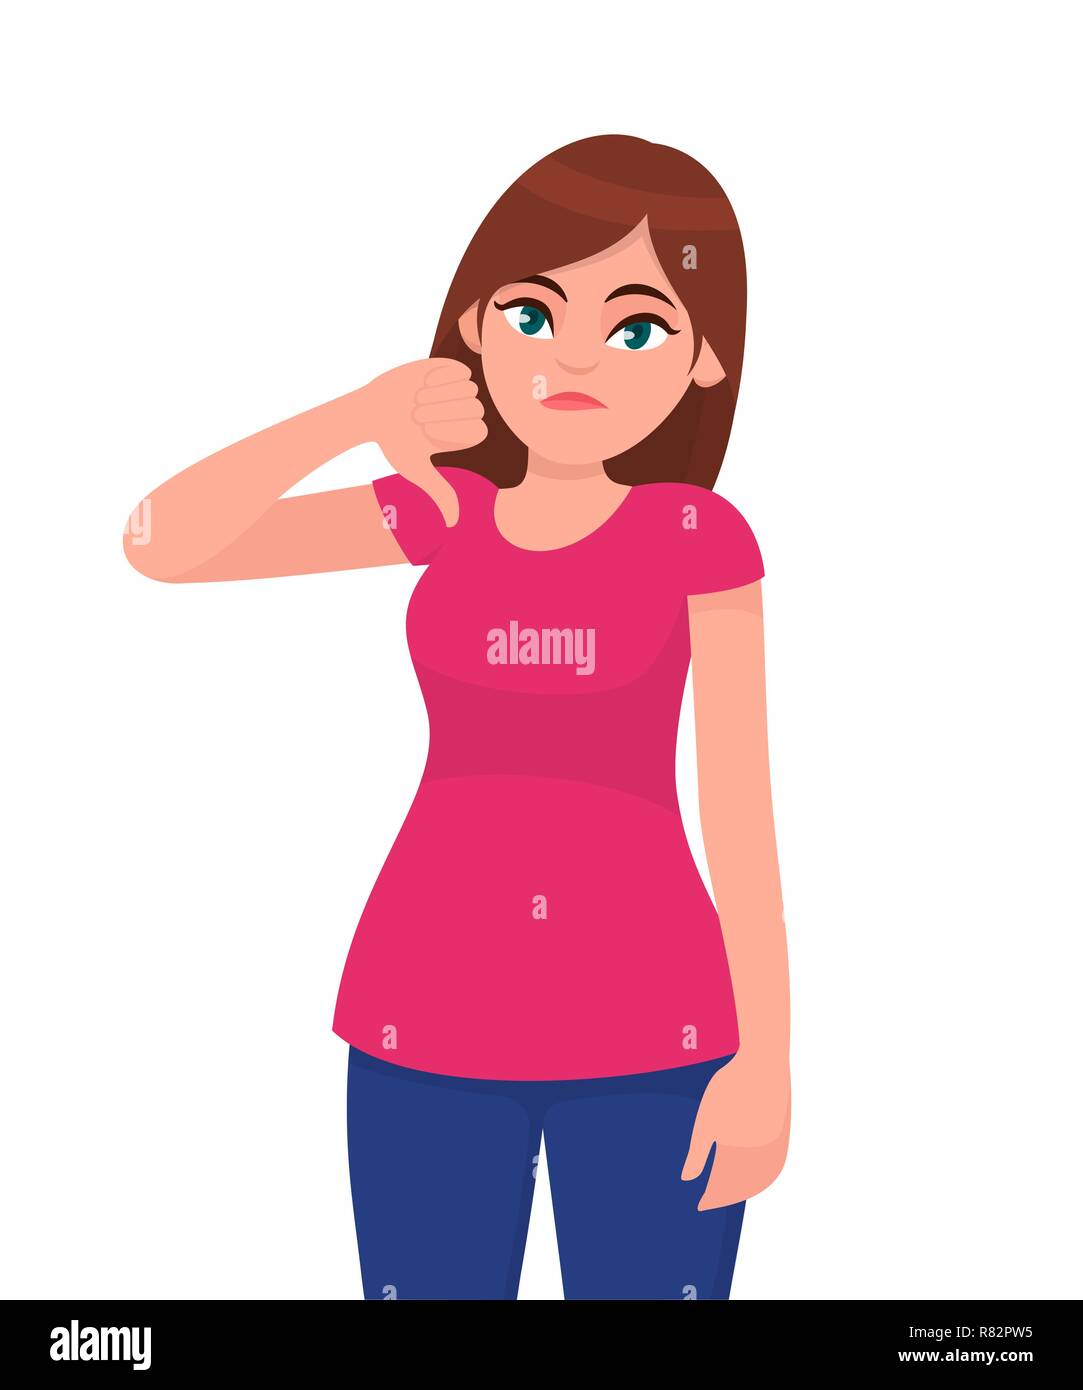 Unhappy woman showing or gesturing thumb down sign. Girl doing a negative gesture, looking with negative expression and disapproval. Bad, dislike. Stock Vector